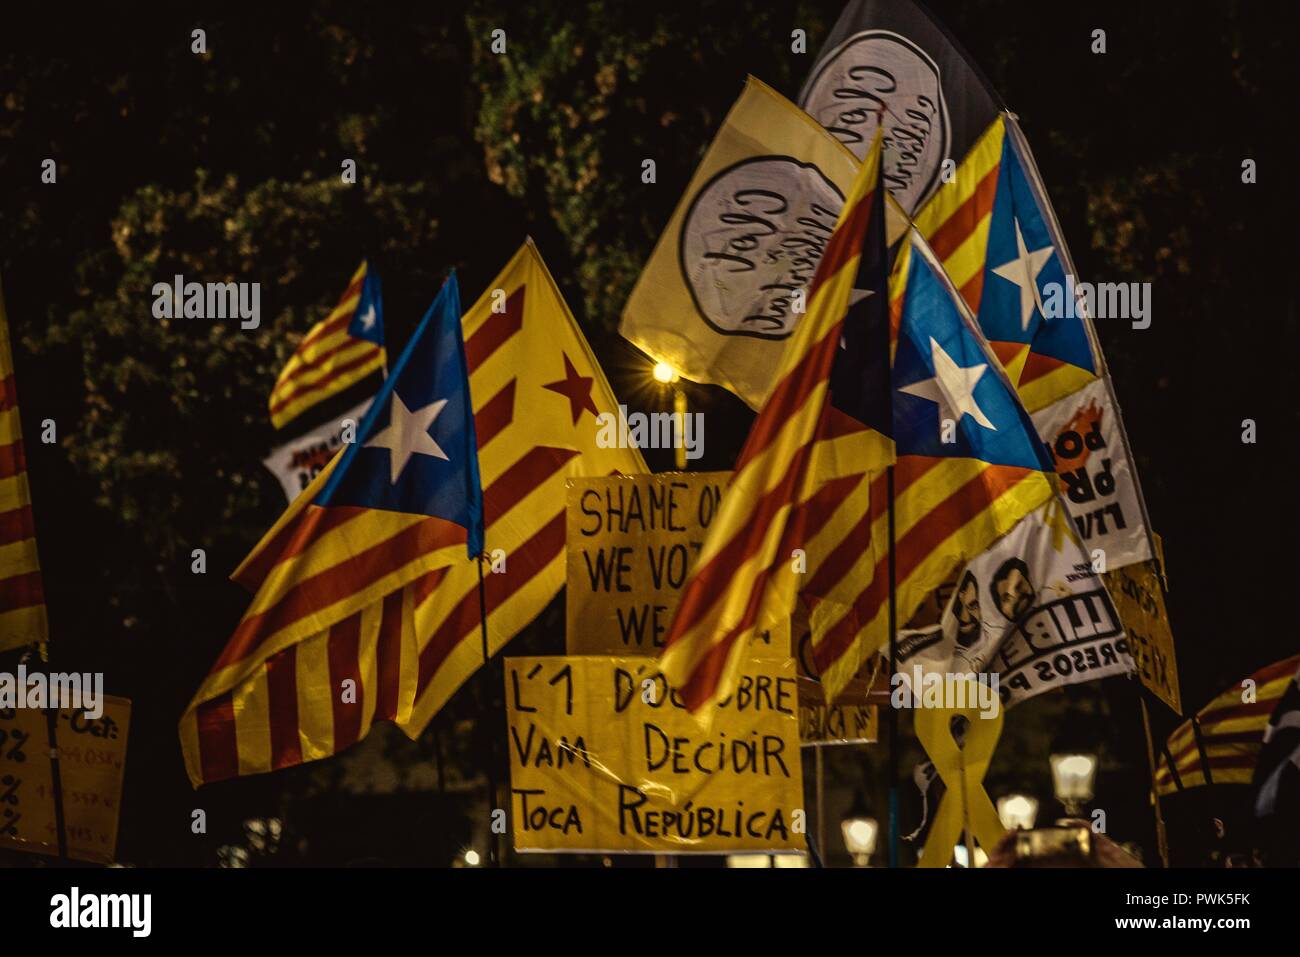 Barcelona, Spain. 16 October, 2018:  Catalan separatists demand 'freedom for the political prisoners' shouting slogans and raising placards the day marking 1 year of imprisonment of former president of the ANC, Jordi Sanchez, and former president of Omnium Cultural, Jordi Cuixart, facing accusations over rebellion and sedition in relation with a banned referendum on secession and the independence vote at the Catalan Parliament in October 2017. Credit: Matthias Oesterle/Alamy Live News Stock Photo